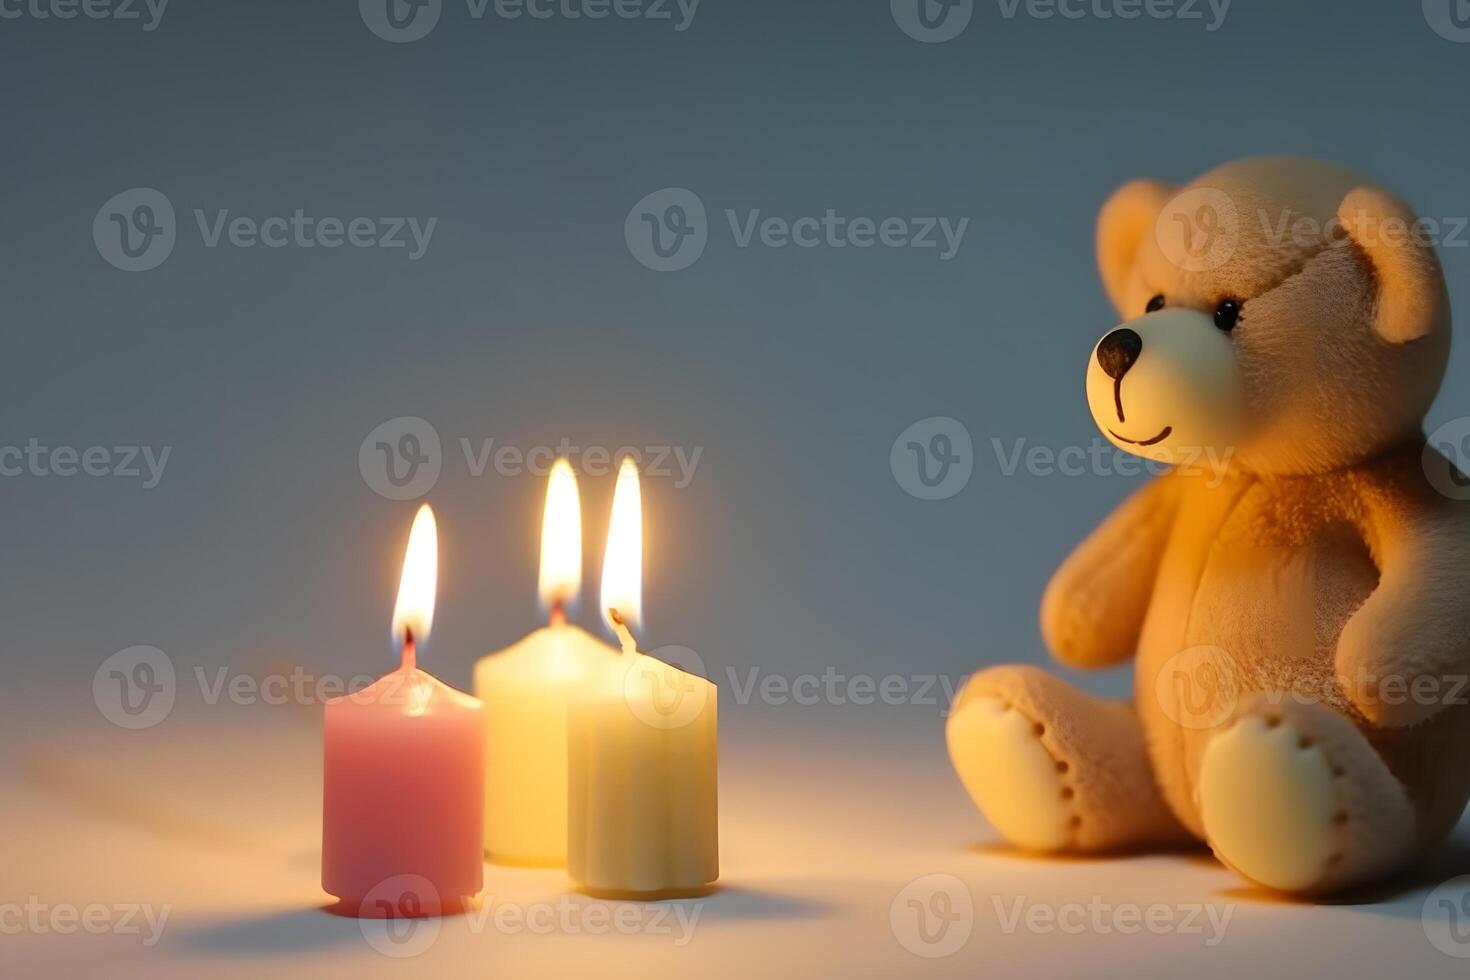 Teddy bear wearing birthday hat and a birthday cake. Neural network photo